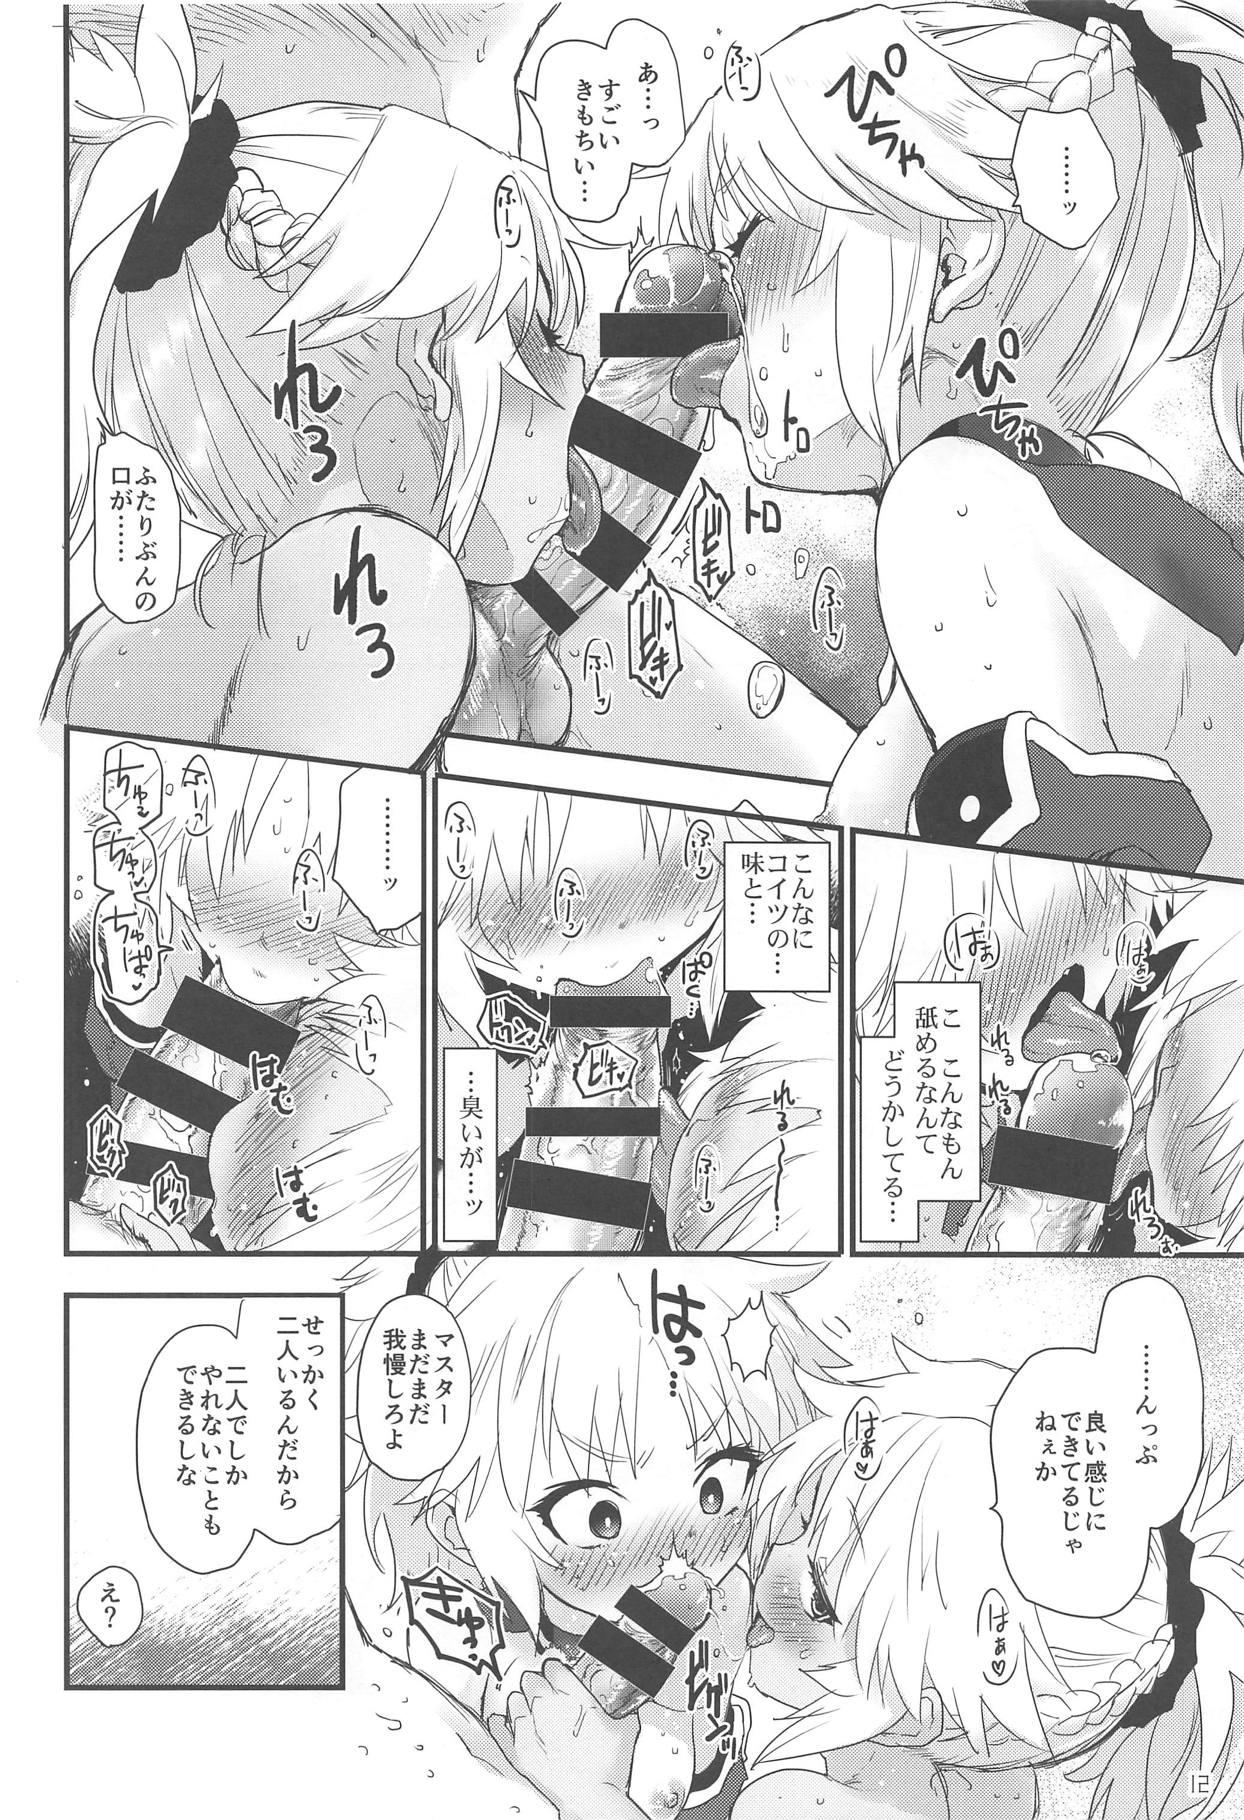 Workout Honeys - Fate grand order Jerk Off Instruction - Page 11